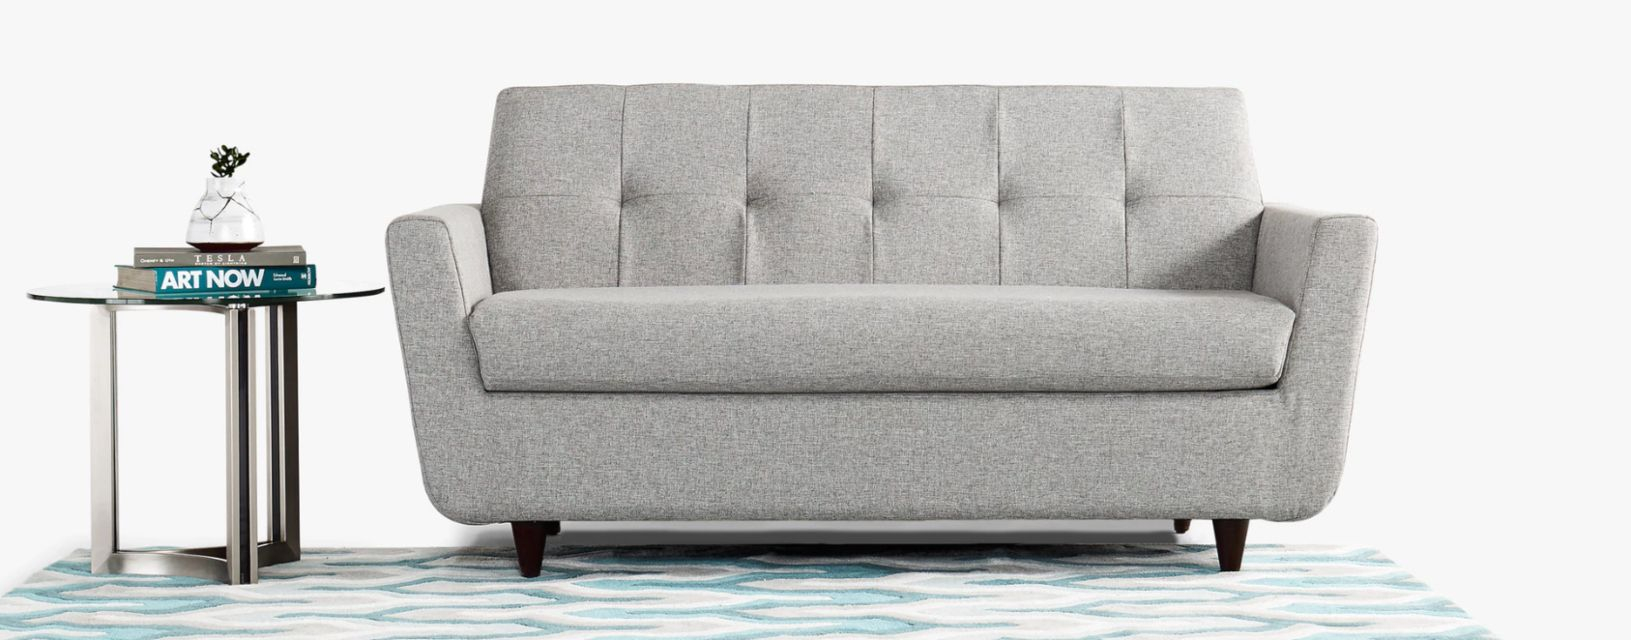 Top Rated Queen Size Sleeper Sofa • Patio Ideas